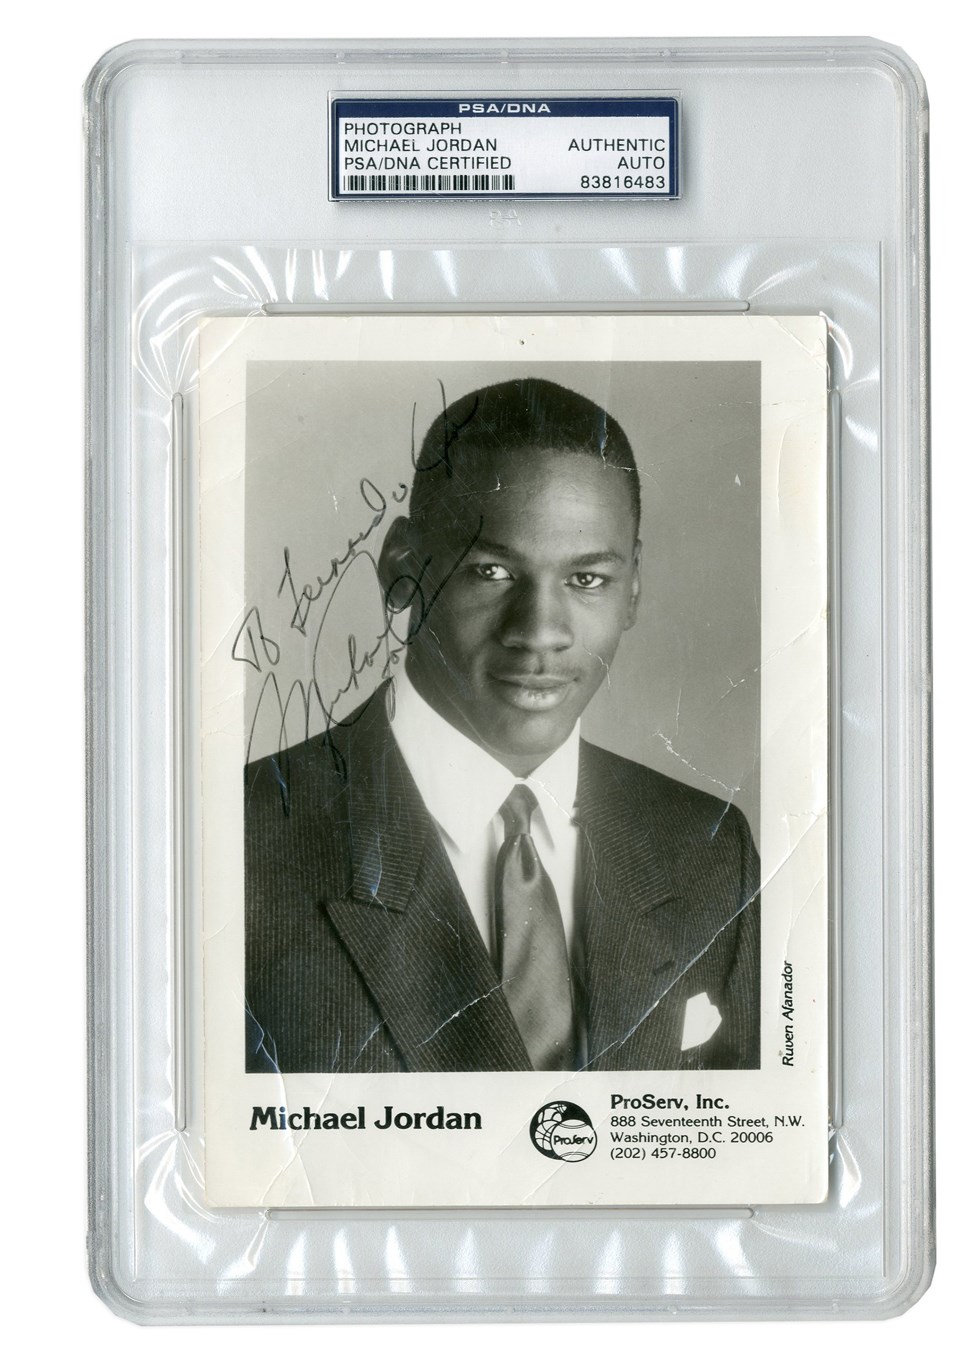 1985 Michael Jordan Signed Promotional Photo from One and Only Public Signing (PSA/DNA)